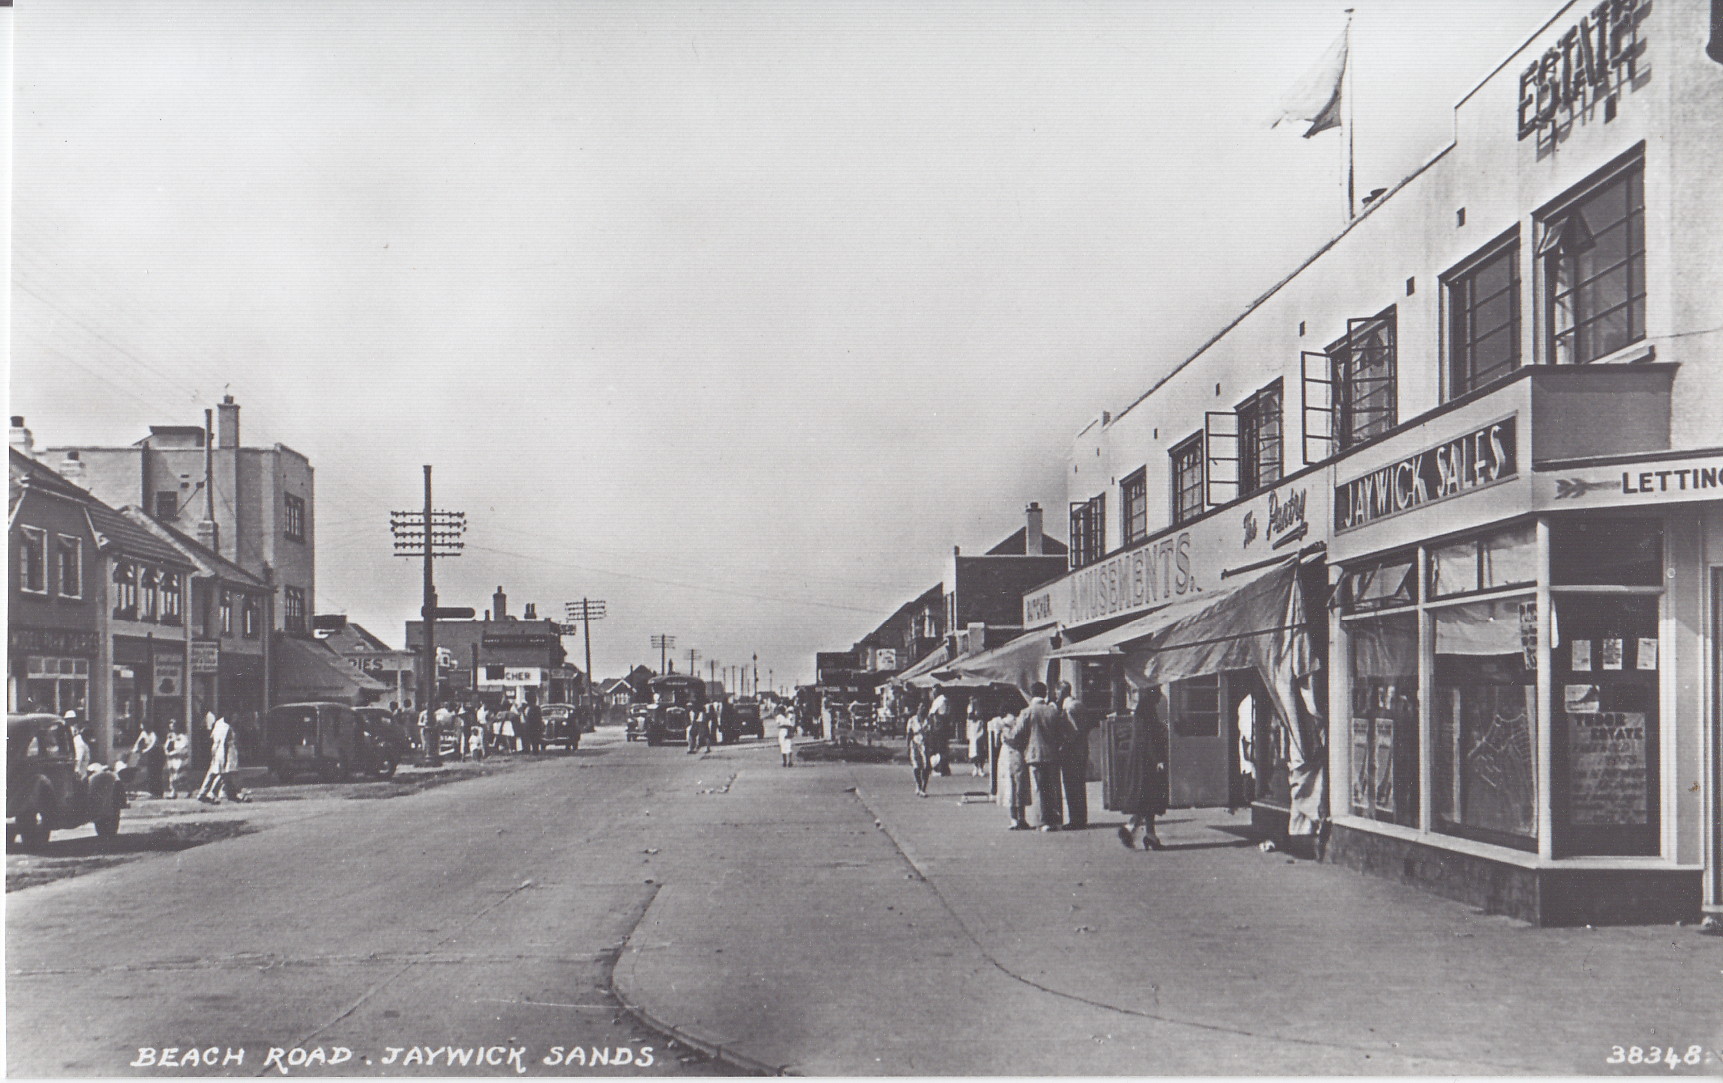 Beach Road which is now known as Broadway, Jaywick Sands